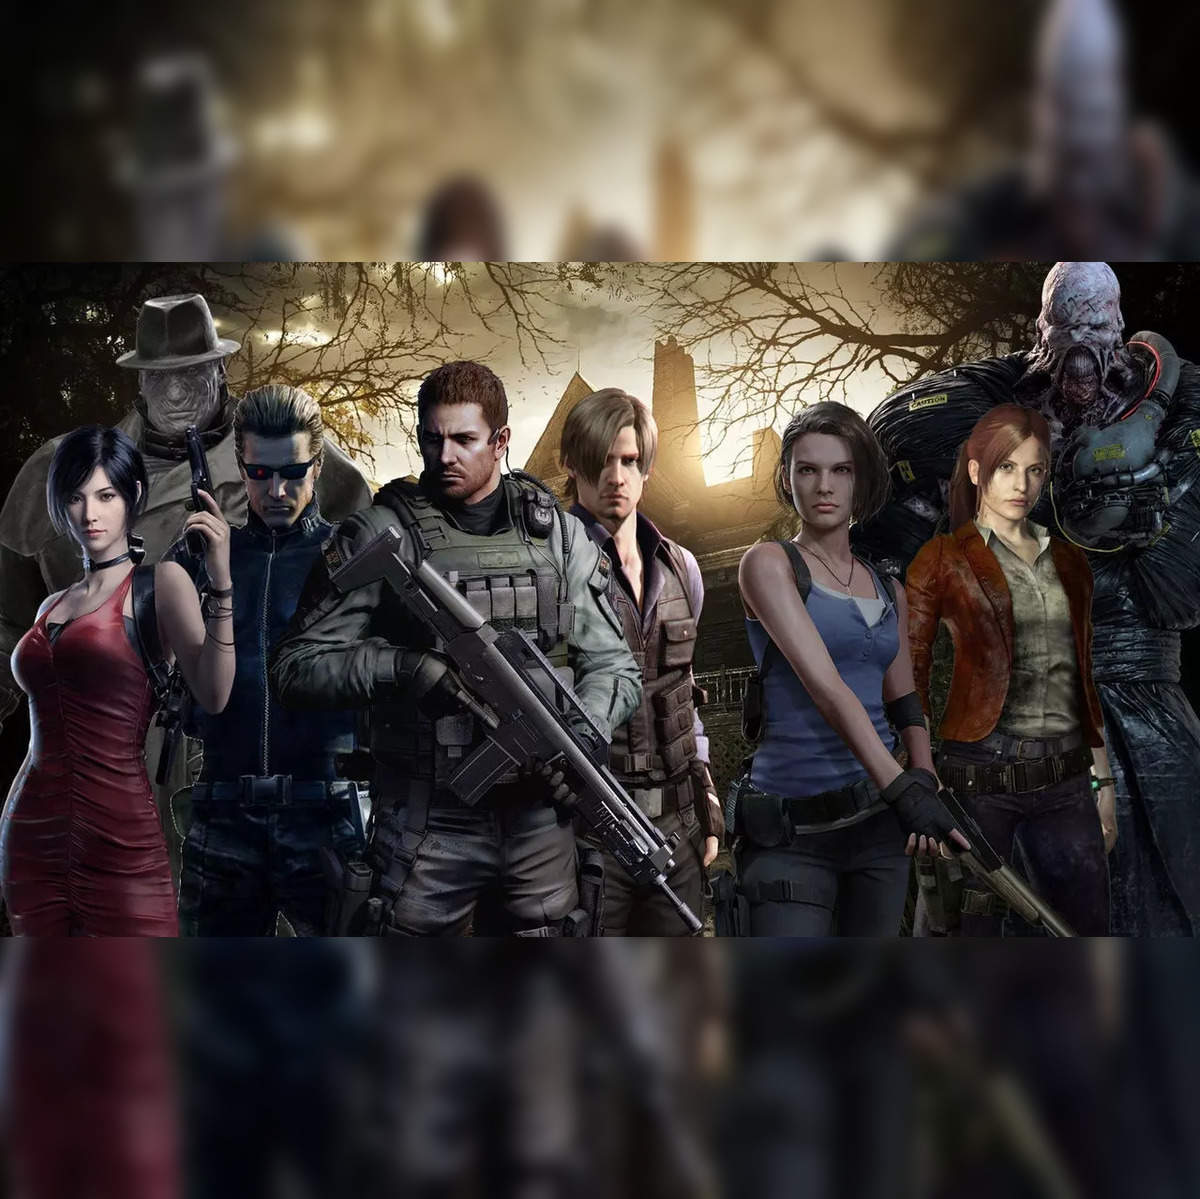 Resident Evil Movies in Order: Chronologically & by Release Date